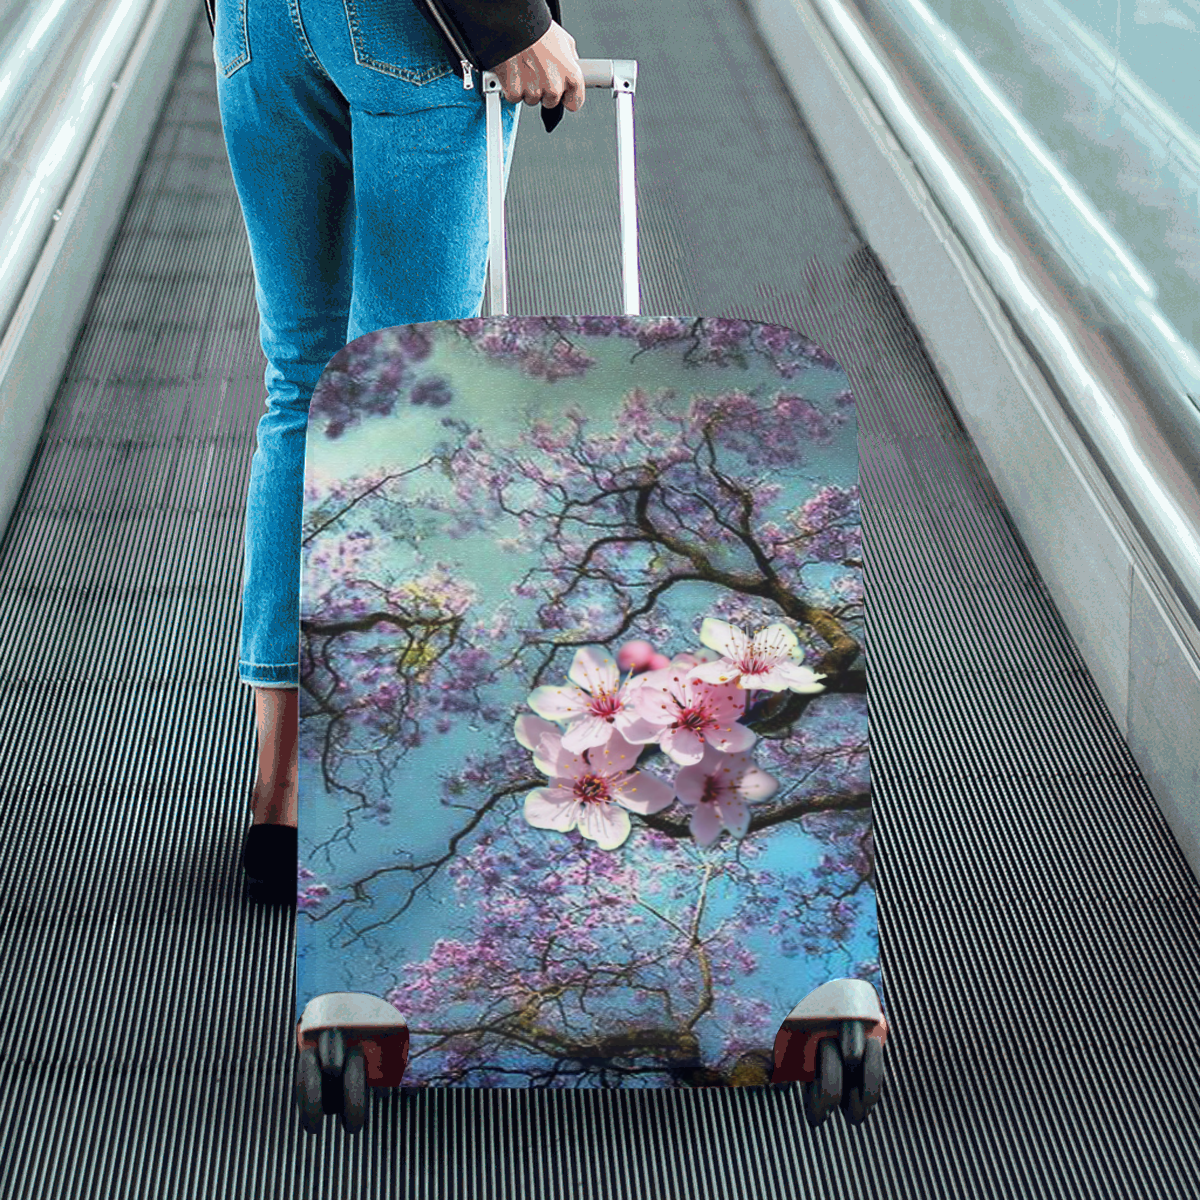 Cherry Blossom Luggage Cover/Large 26"-28"